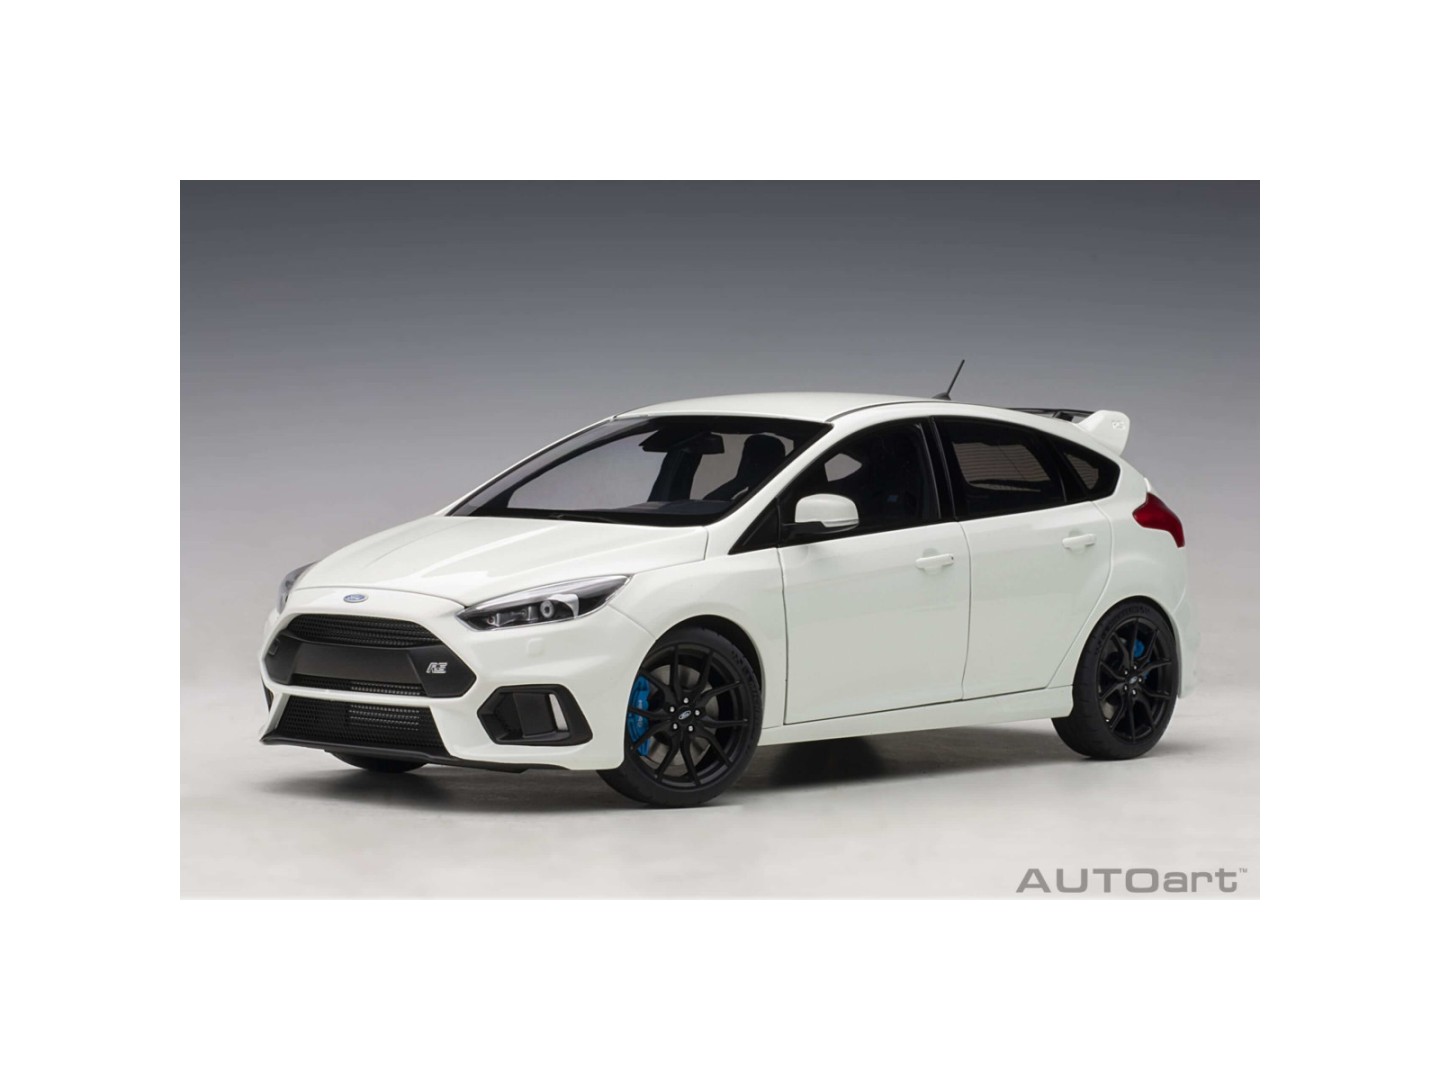 Marketplace - Ford Focus RS 2016 Blanc Glace  - Autoart - 1:18